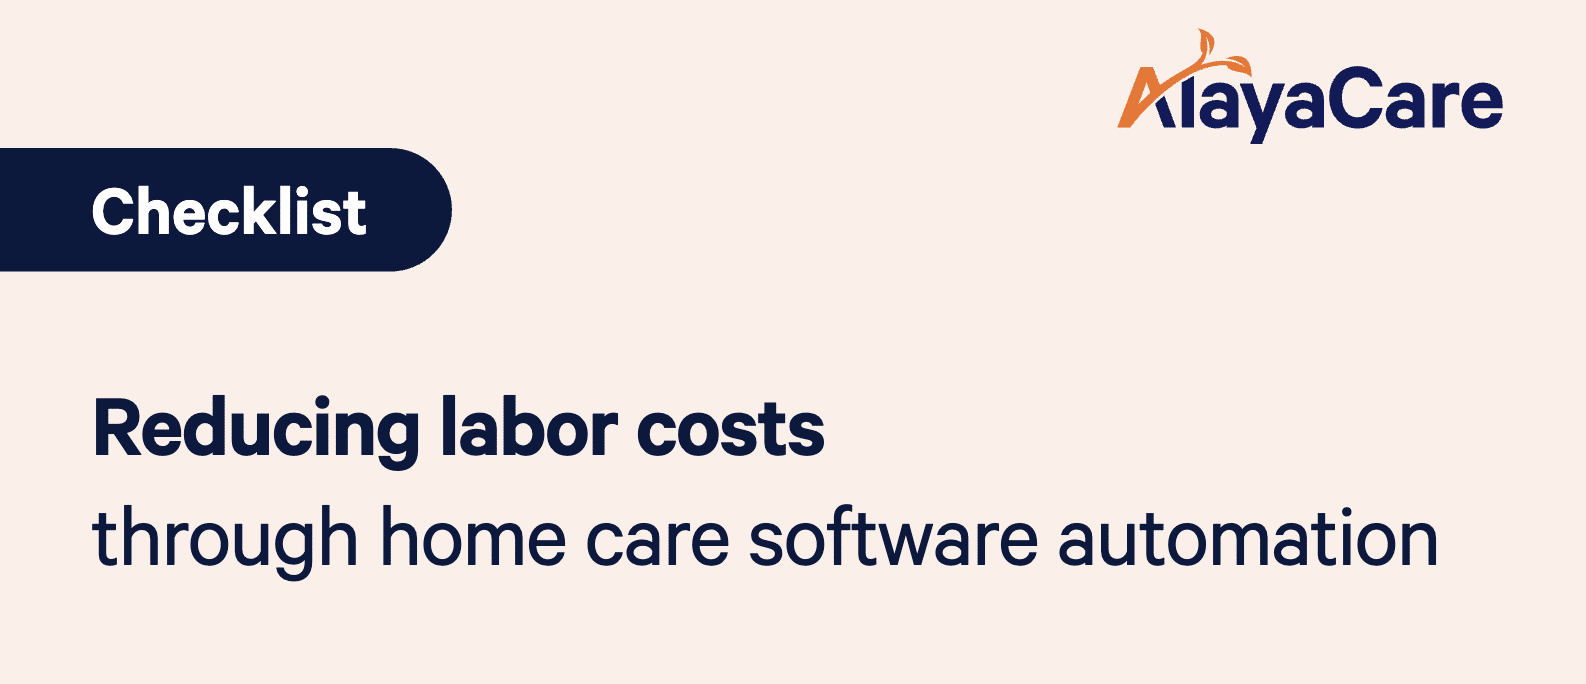 Checklist - Reducing Labor Costs Through Automation in Home Care